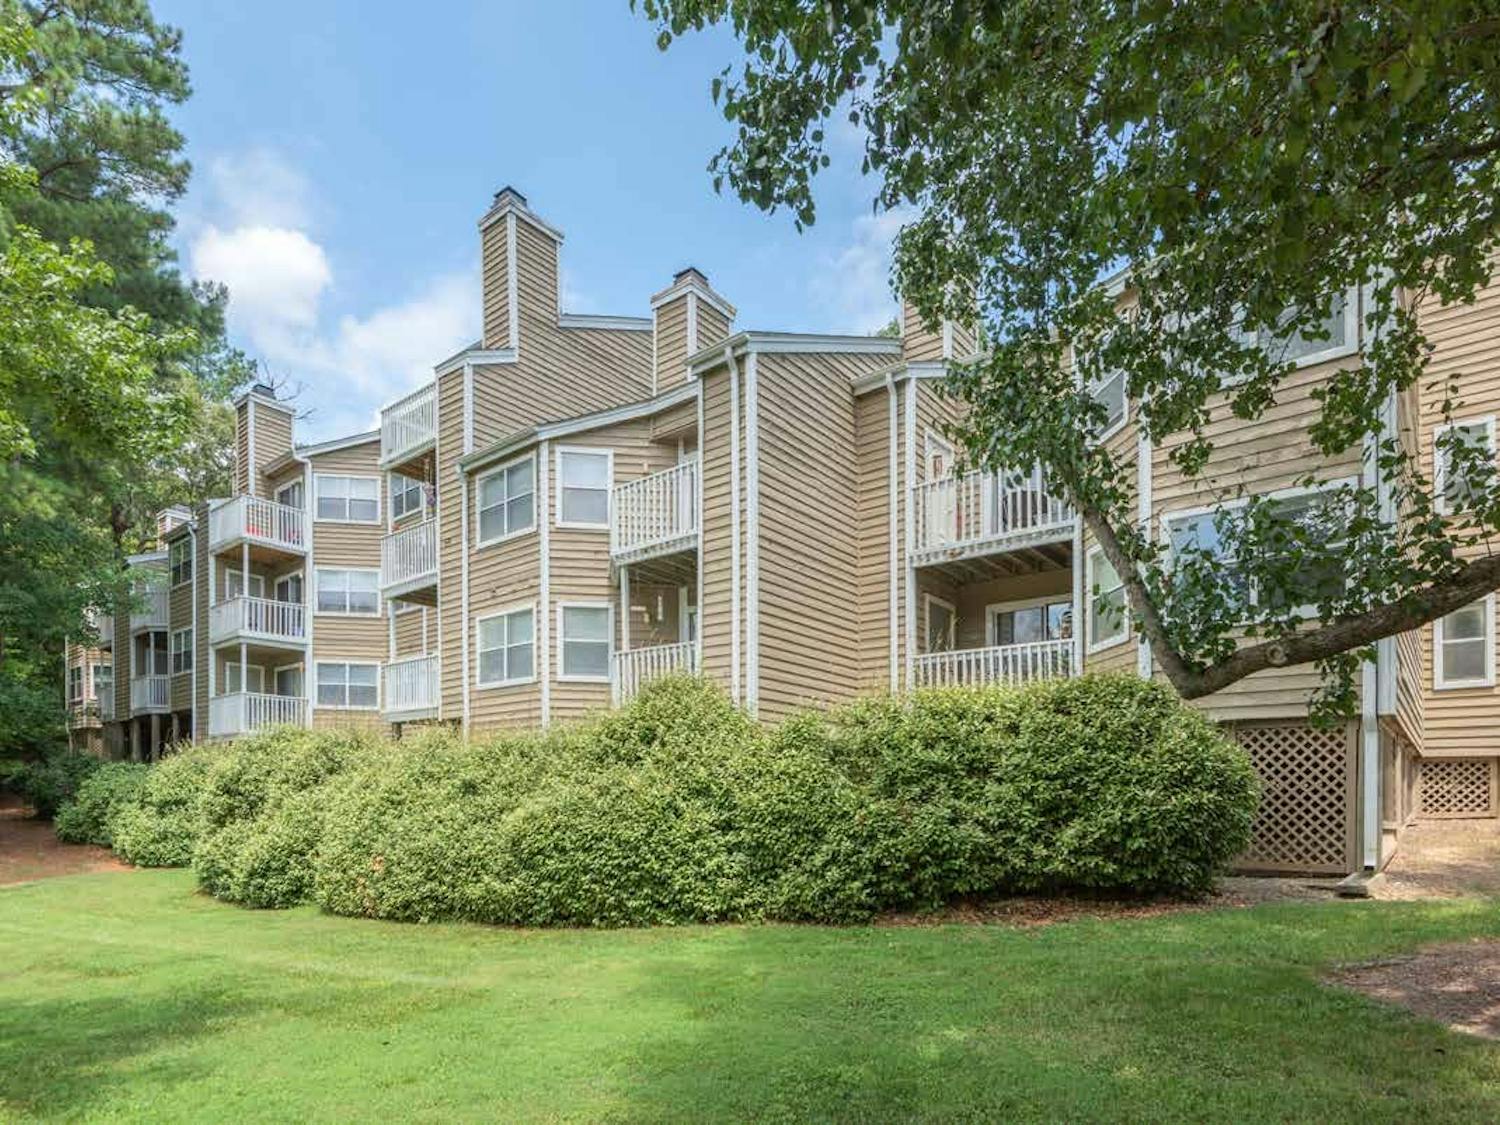 Audubon, an Atlanta-based real estate firm, announced that it acquired the 180 West Apartment Homes in Carrboro. Photo courtesy of Audubon. 